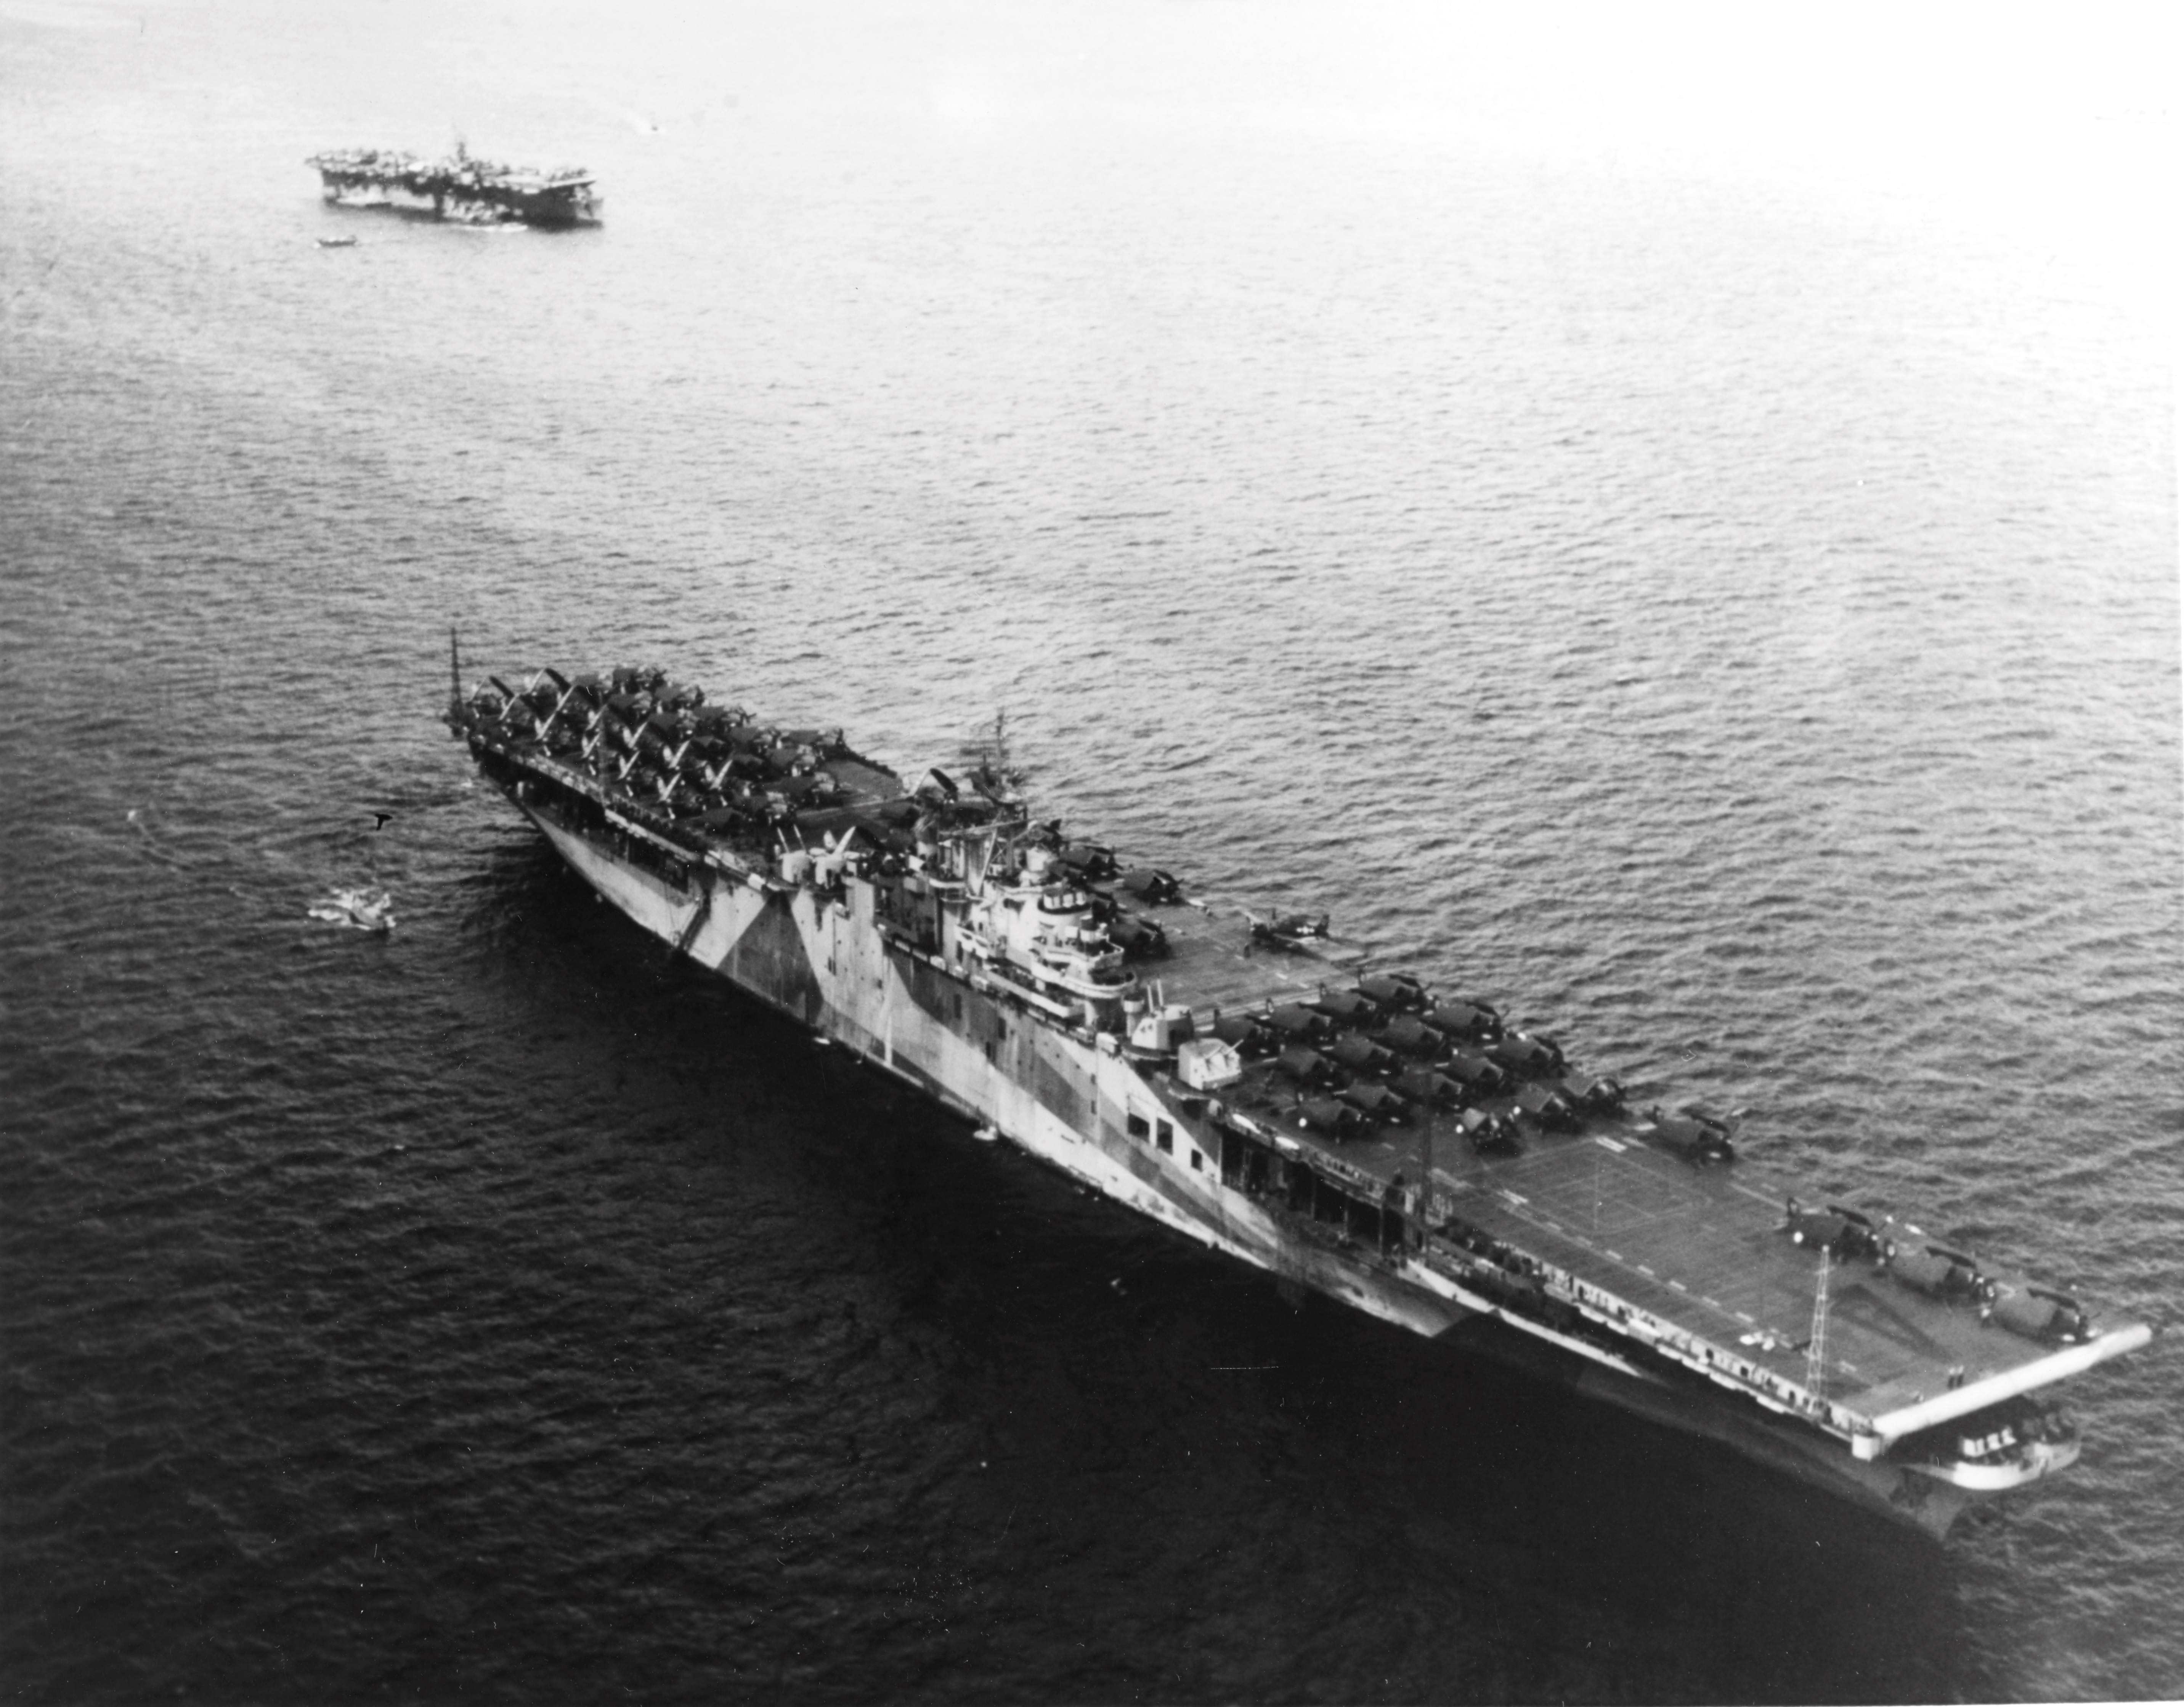 Carrier USS Ticonderoga at anchor in Ulithi Lagoon 8 Dec 1944 with USS Langley (Independence-class) beyond. Note the faded Ms33/10A paint scheme. Ticonderoga’s flight deck is loaded with the planes of Air Group 80.